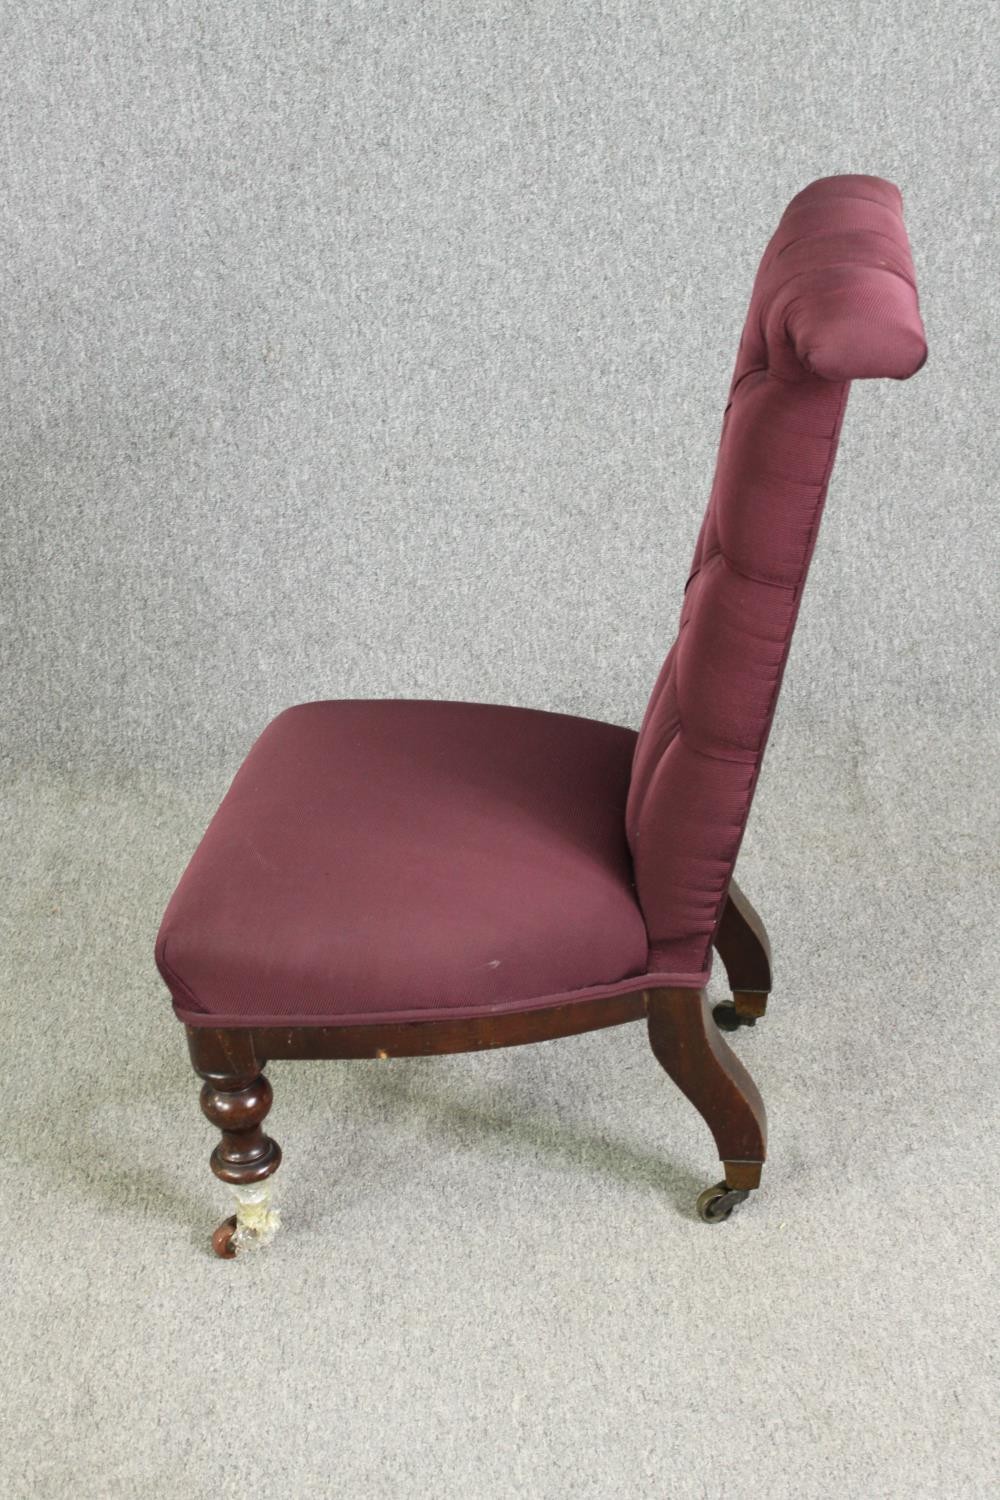 A Victorian mahogany prie dieu chair with modern aubergine textured upholstery. H.96cm. - Image 4 of 6